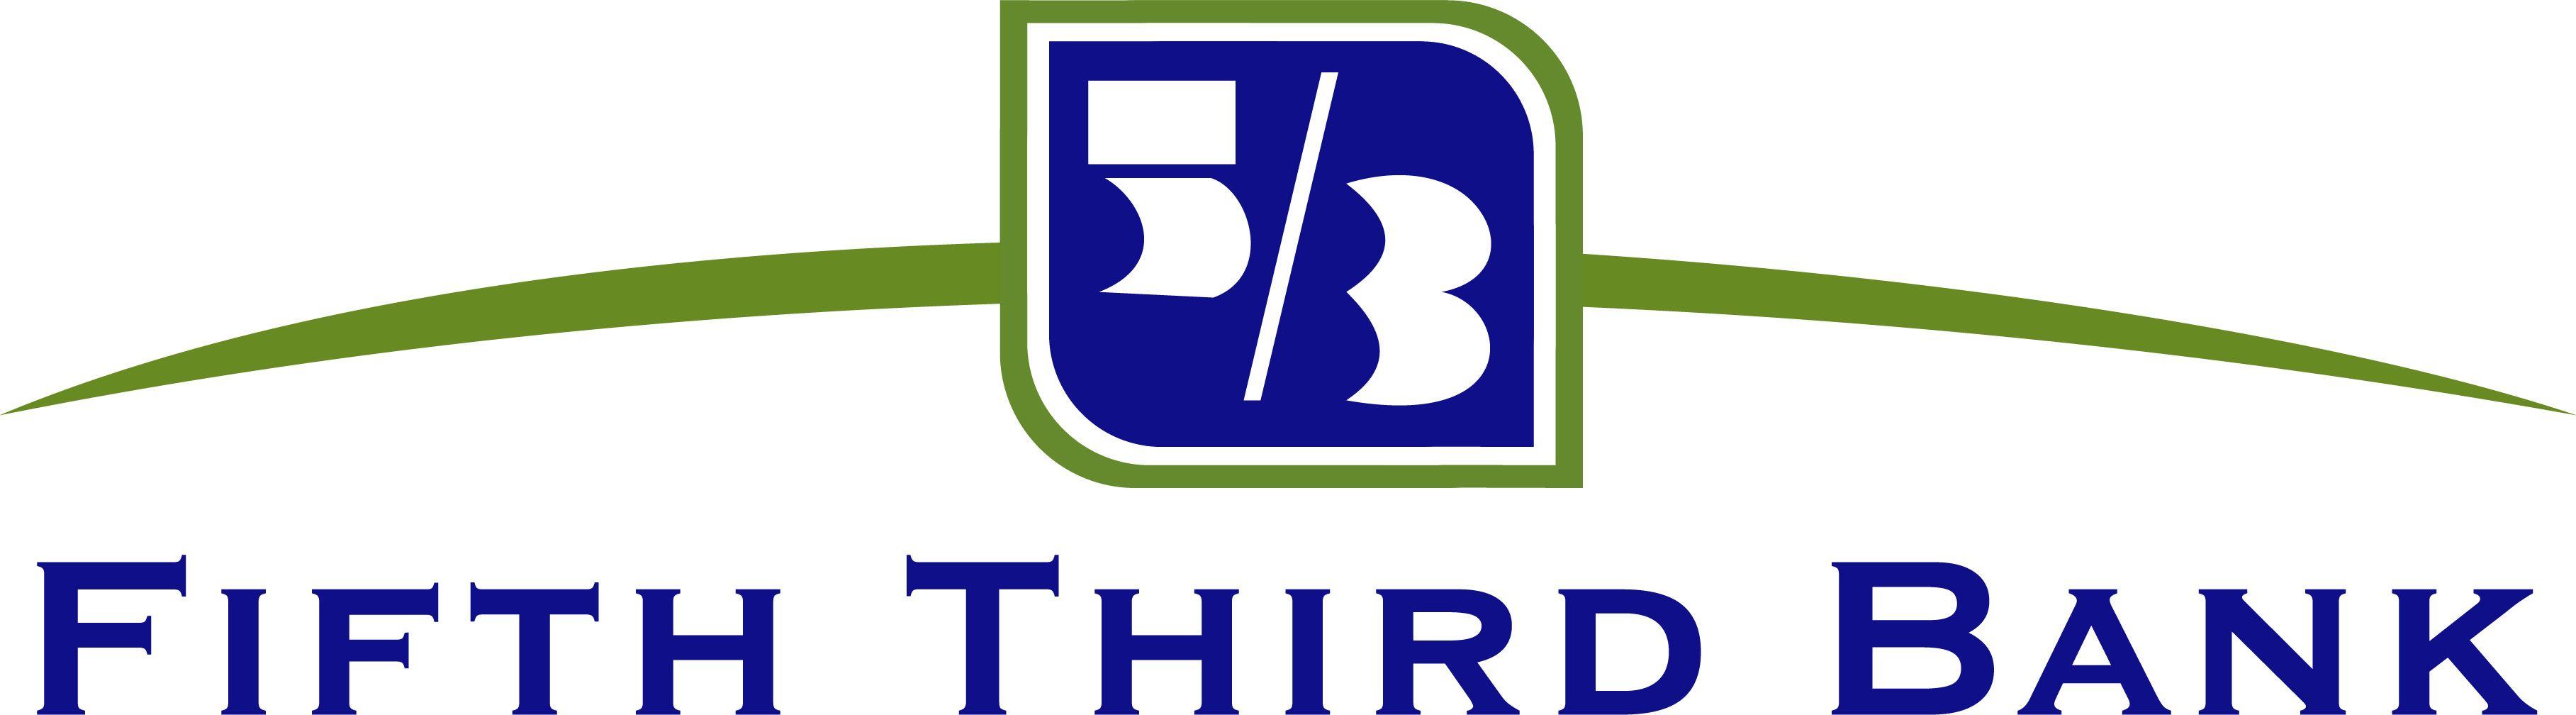 Fifth Third Bank Logo - ProsperUS Detroit Annual Convening Presented by Fifth Third ...